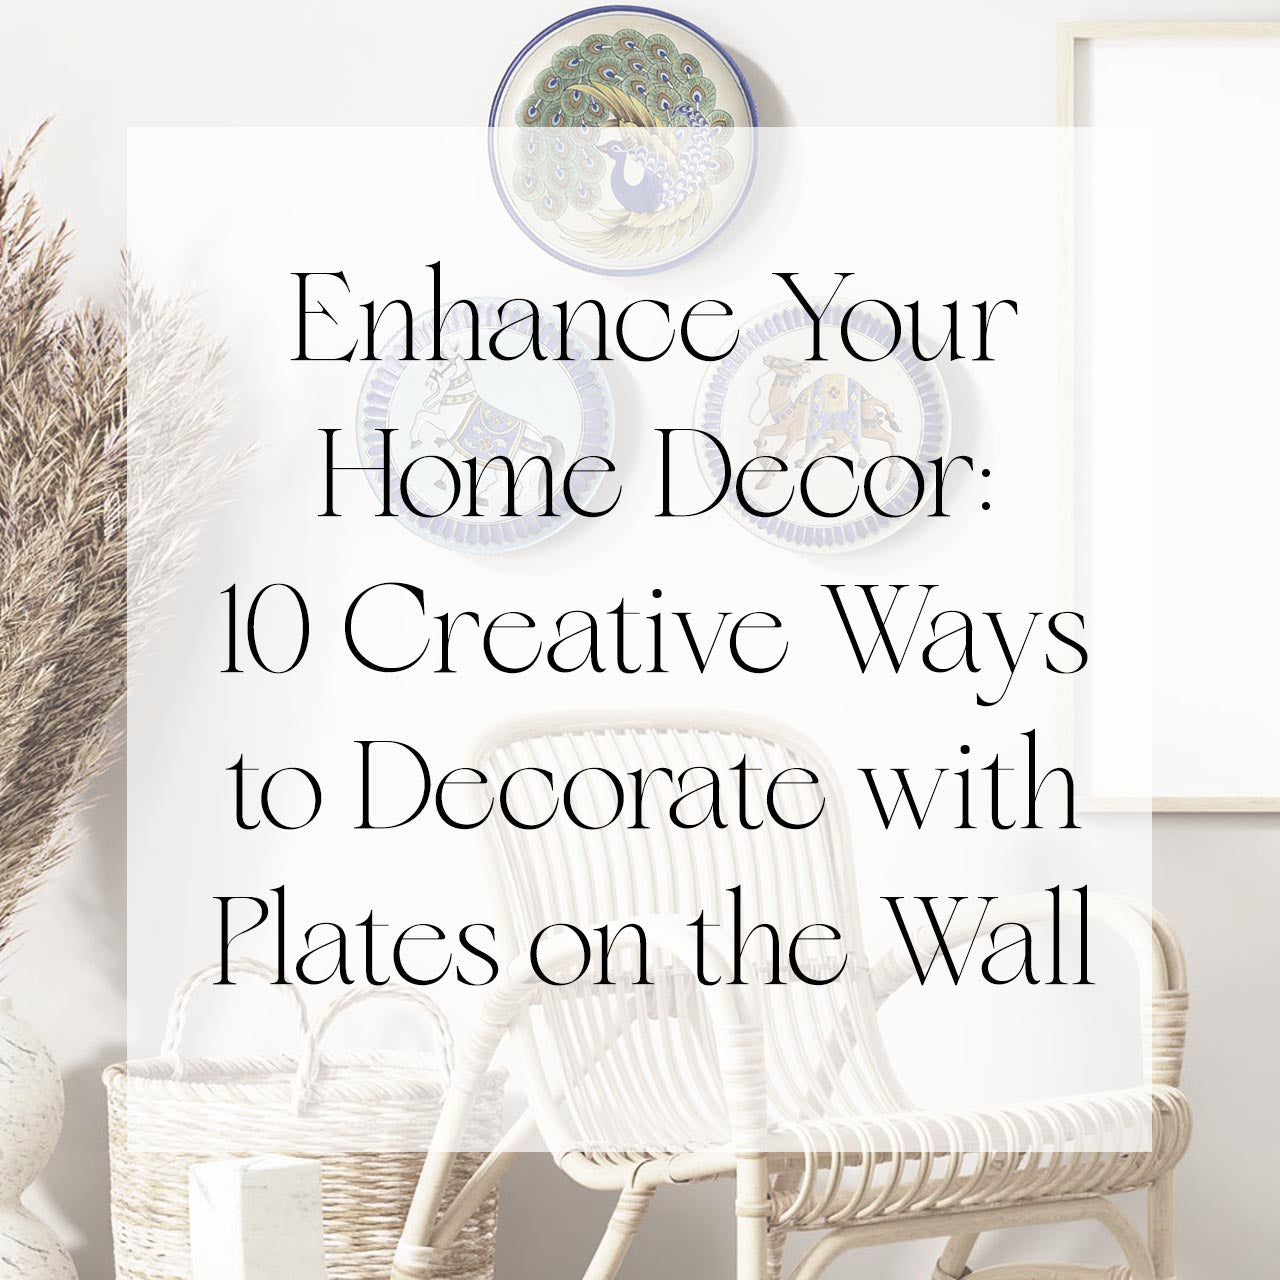 Decorate with plates on the wall